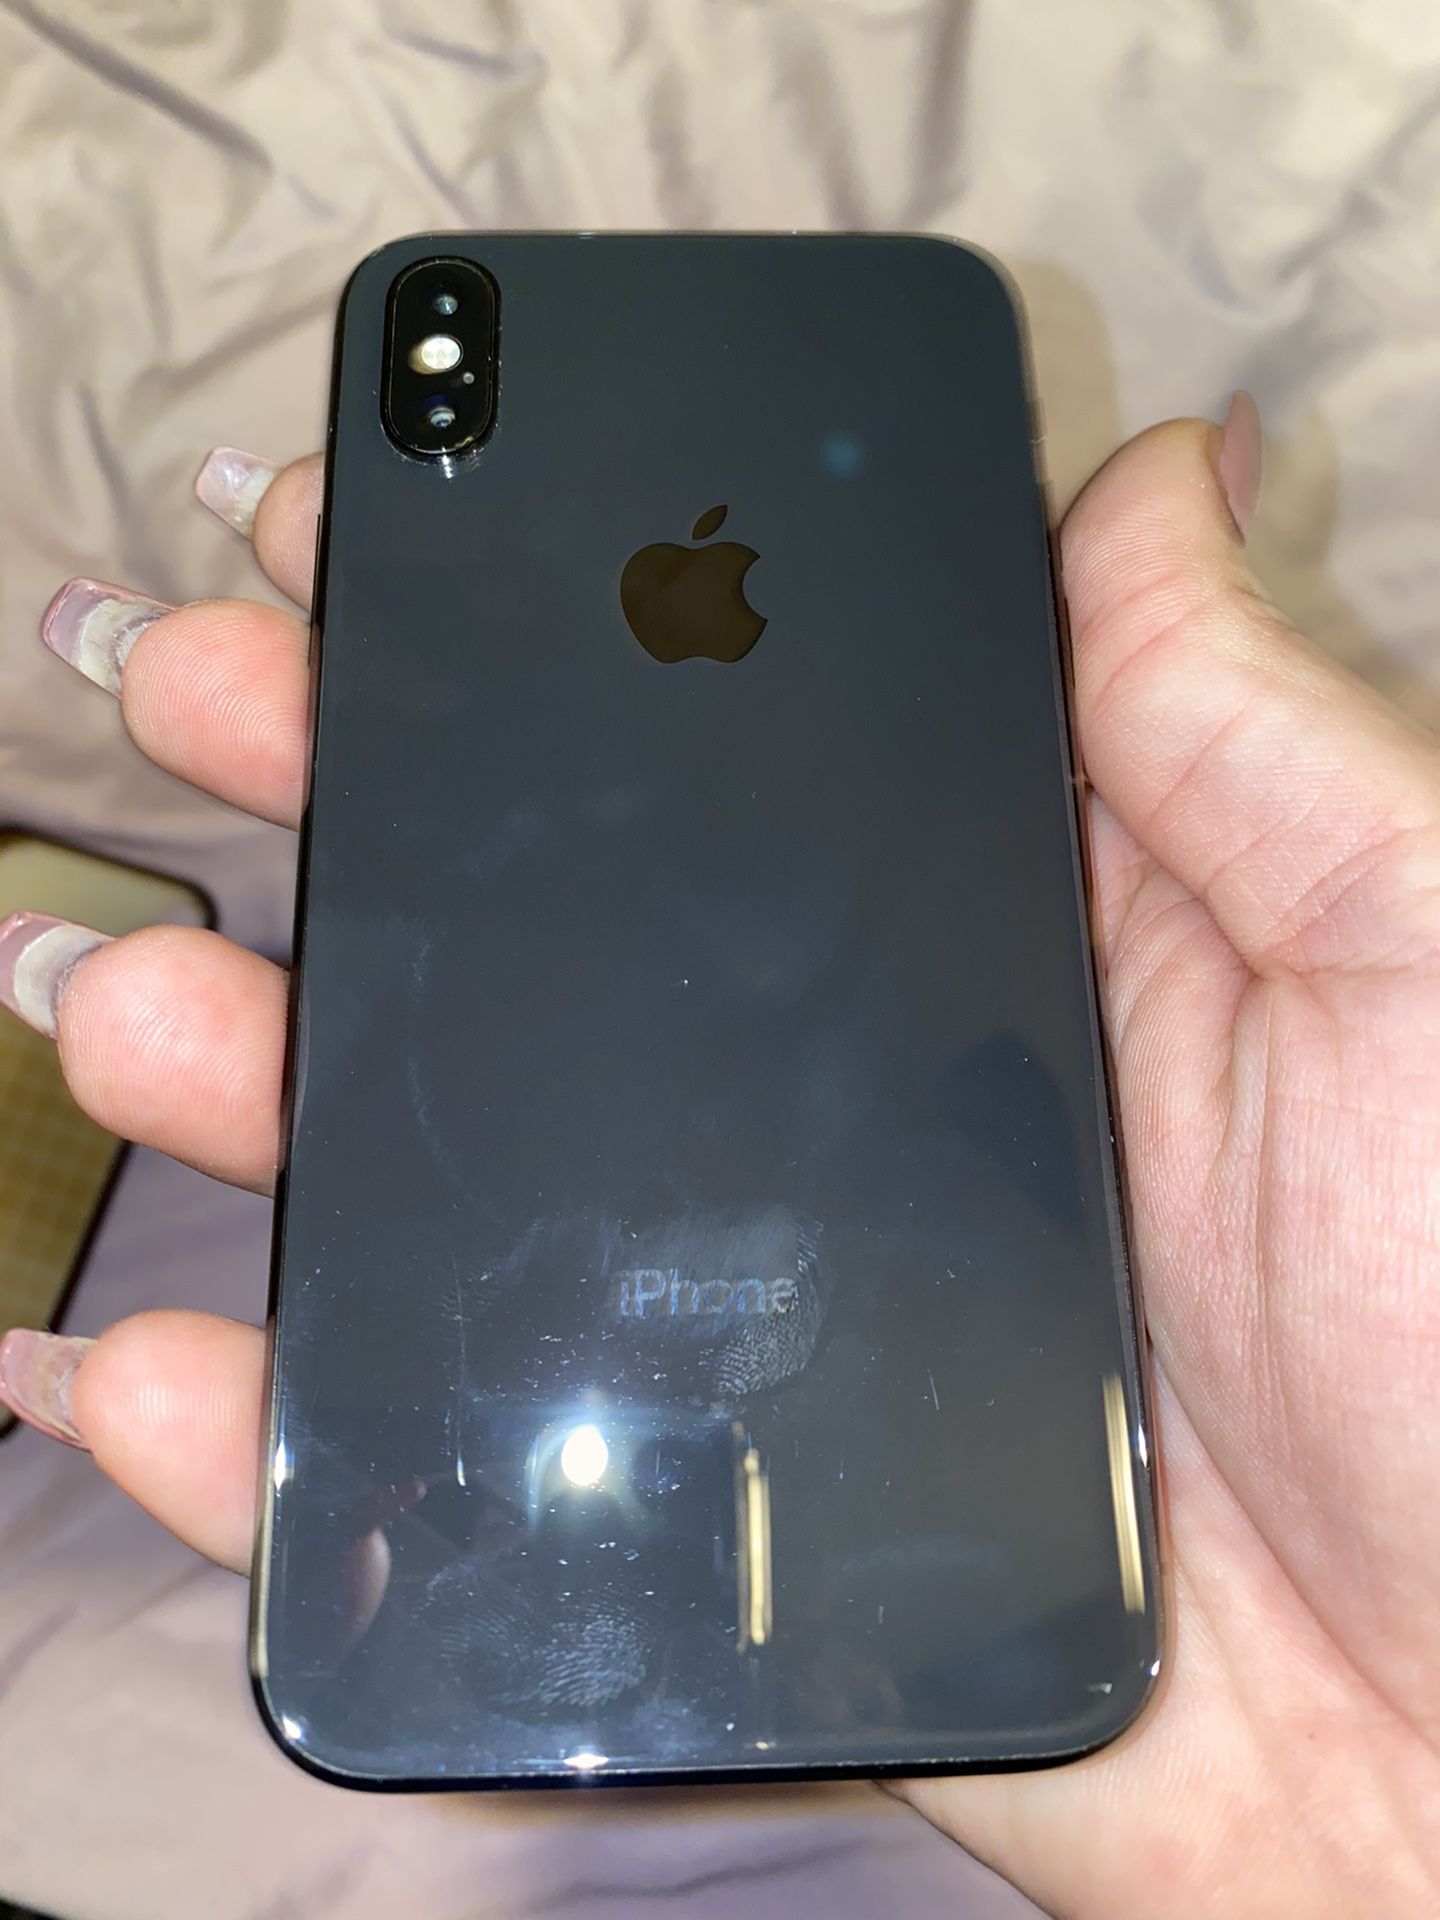 UNLOCKED IPHONE X with free privacy screen